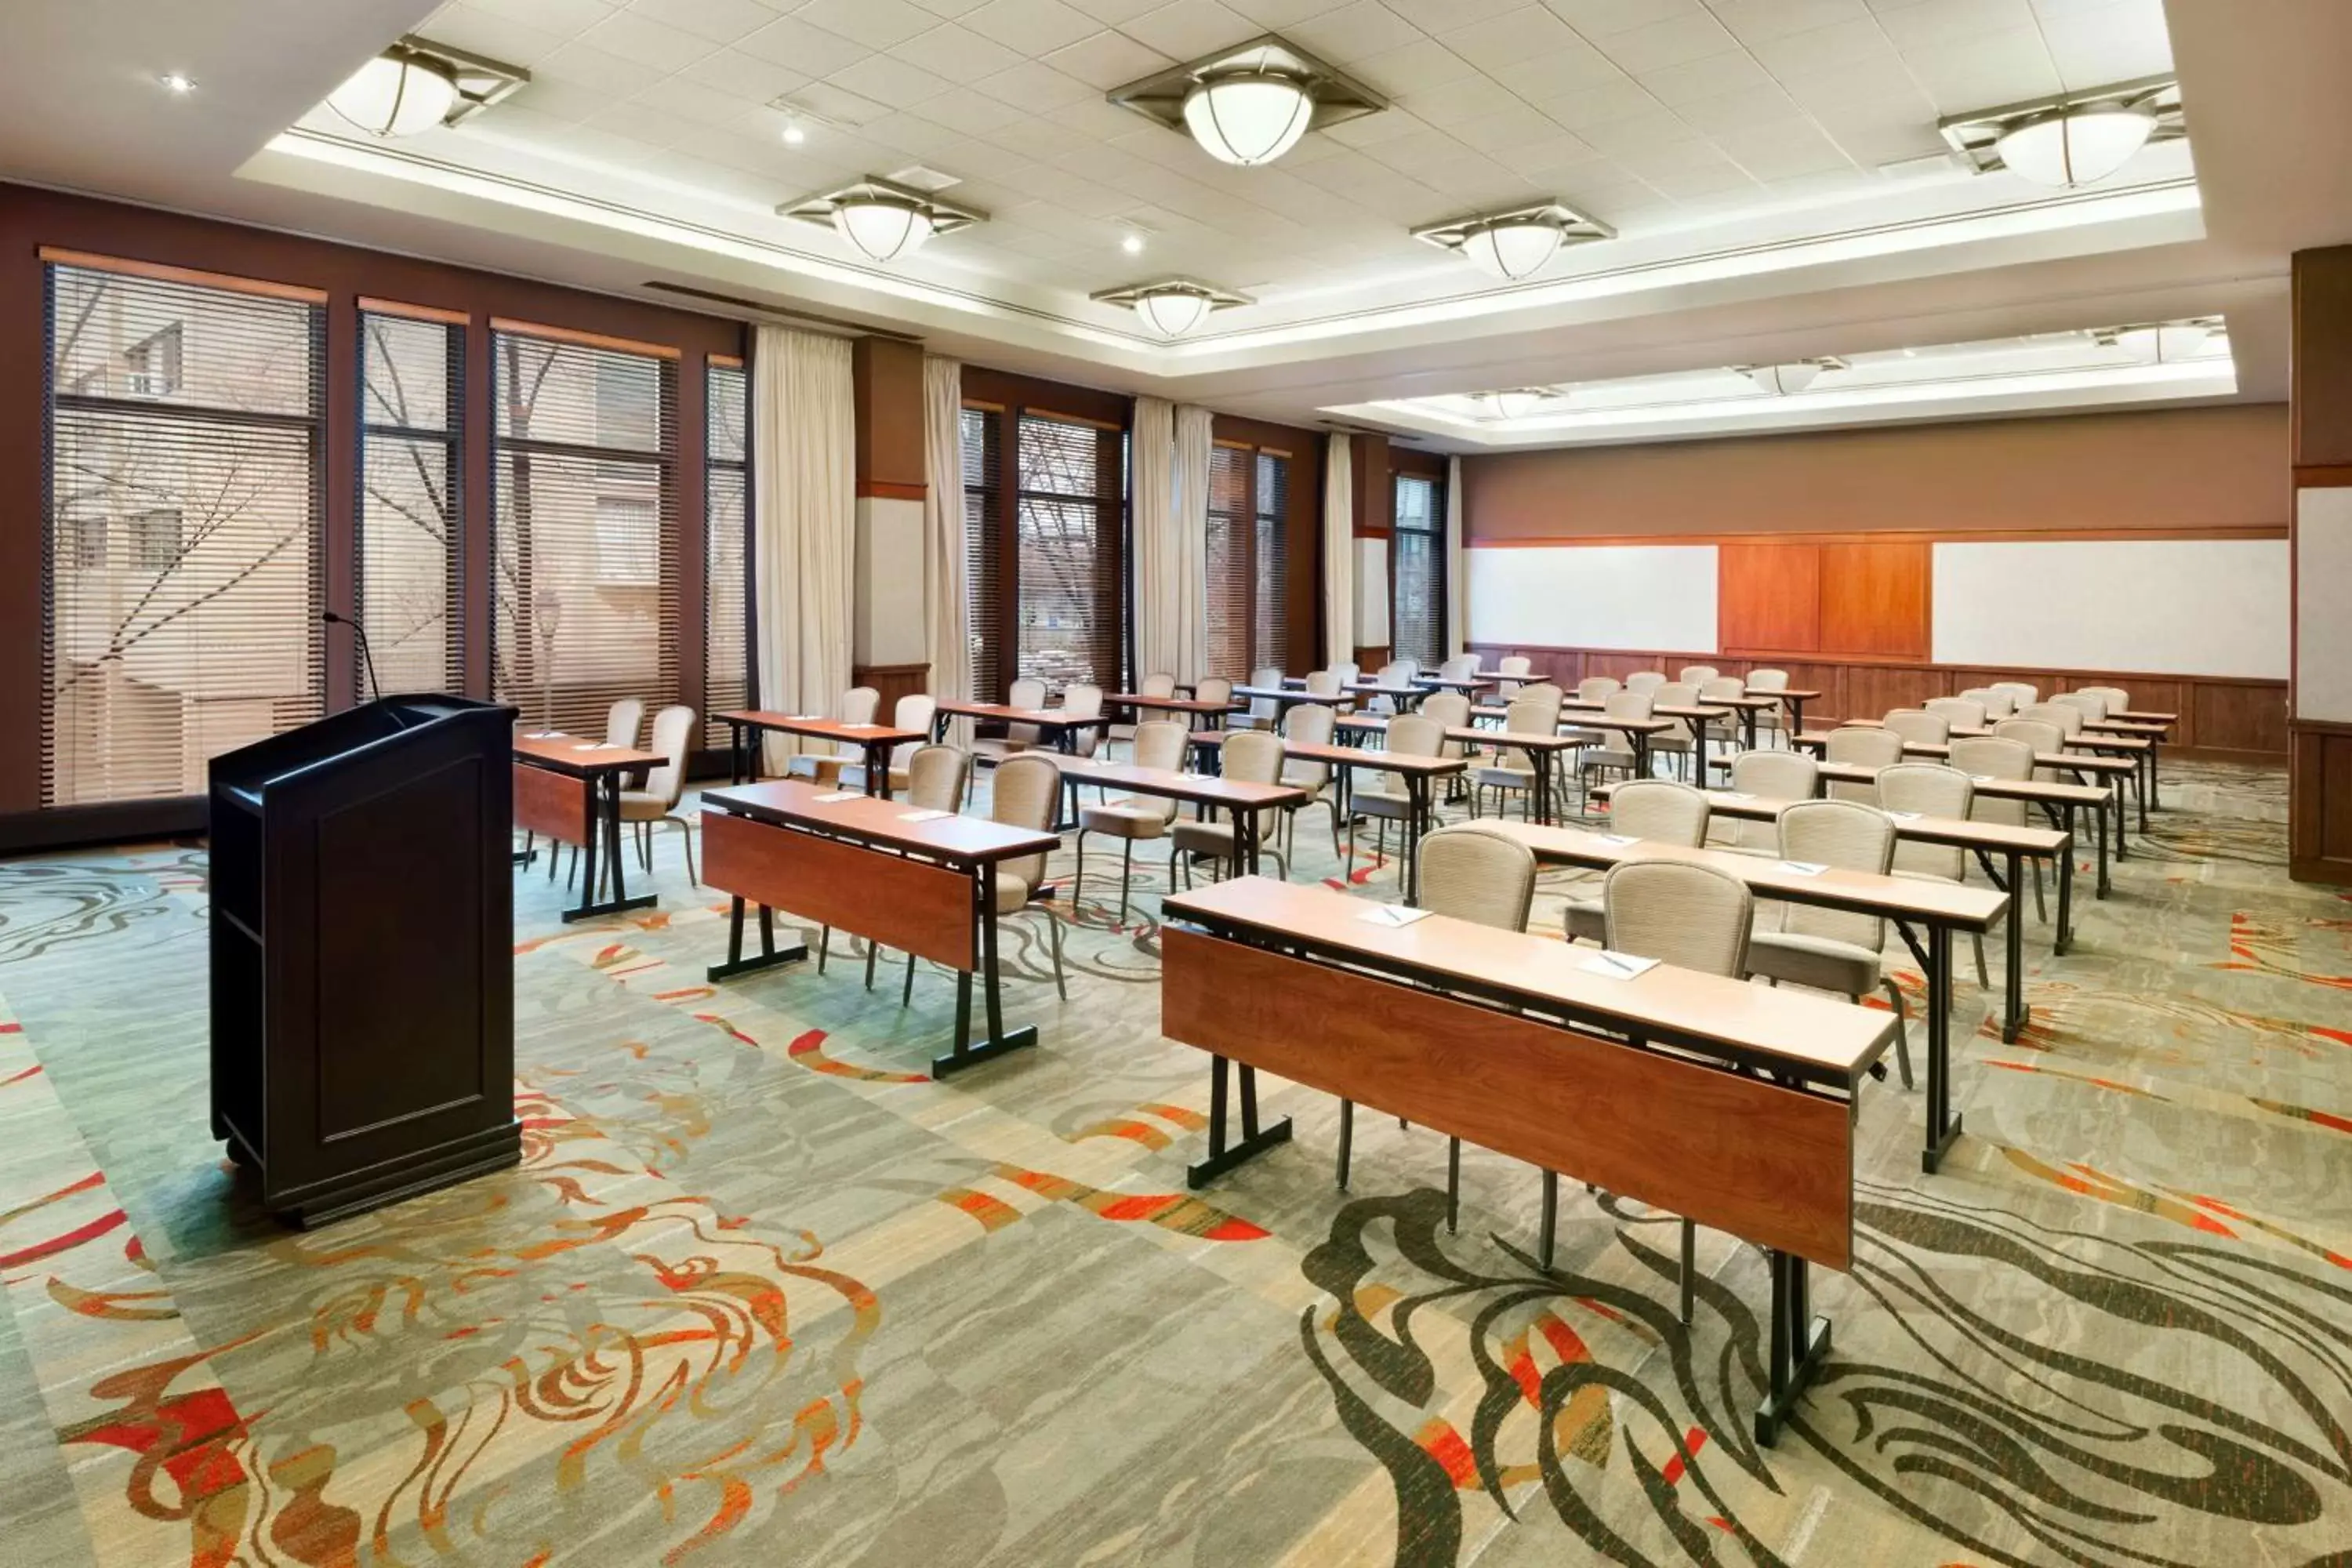 Meeting/conference room in The Inn at Penn, A Hilton Hotel